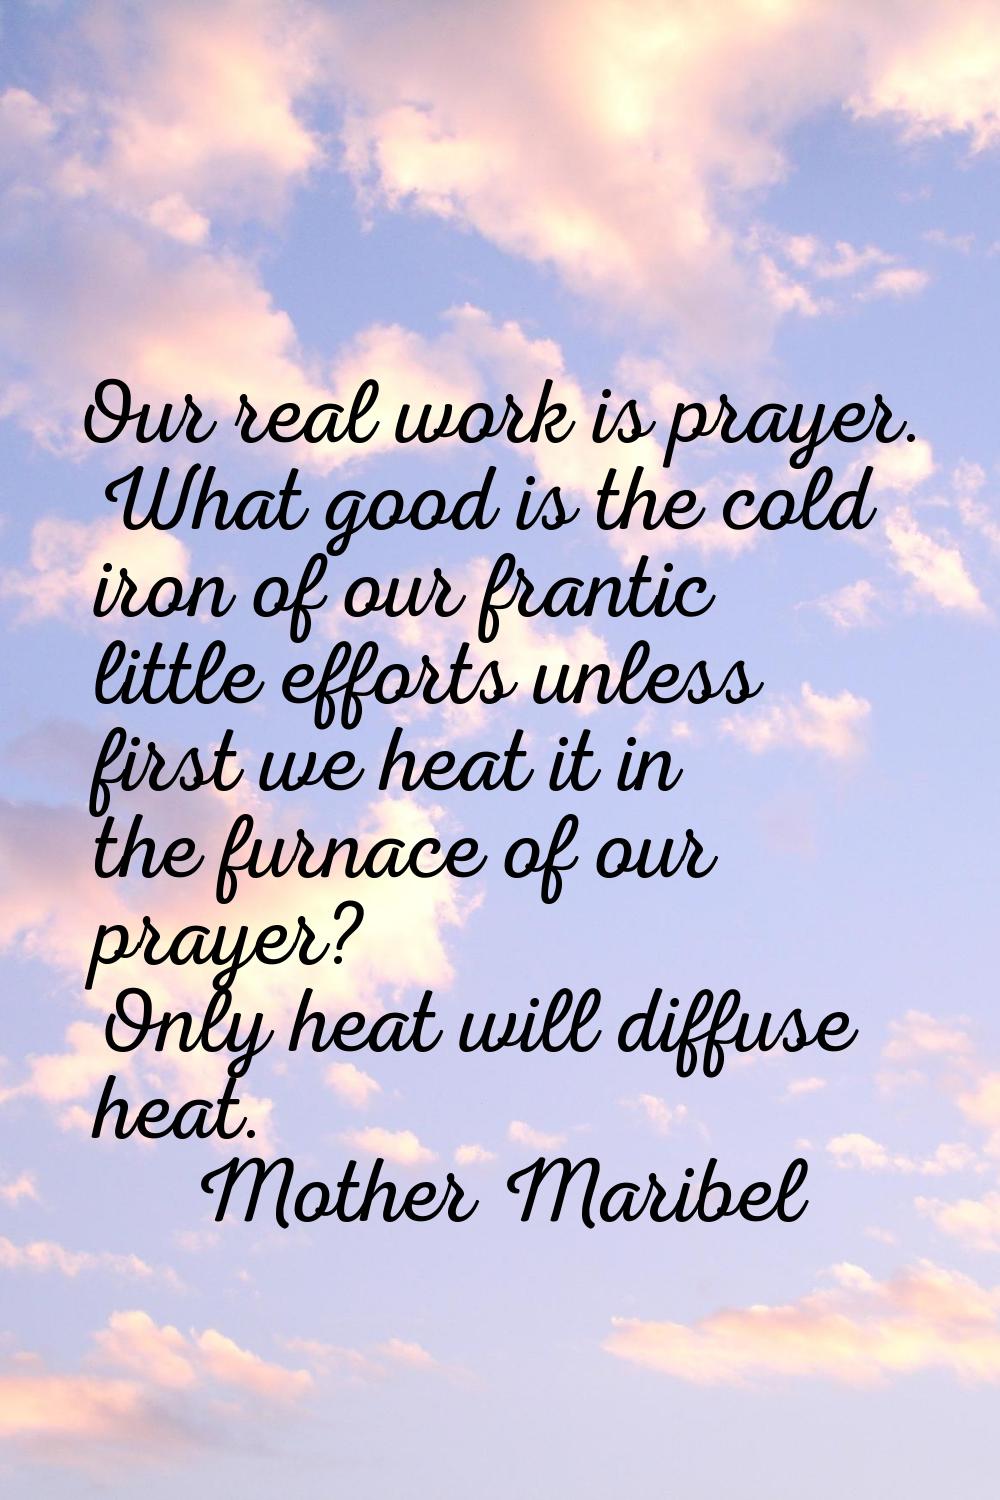 Our real work is prayer. What good is the cold iron of our frantic little efforts unless first we h